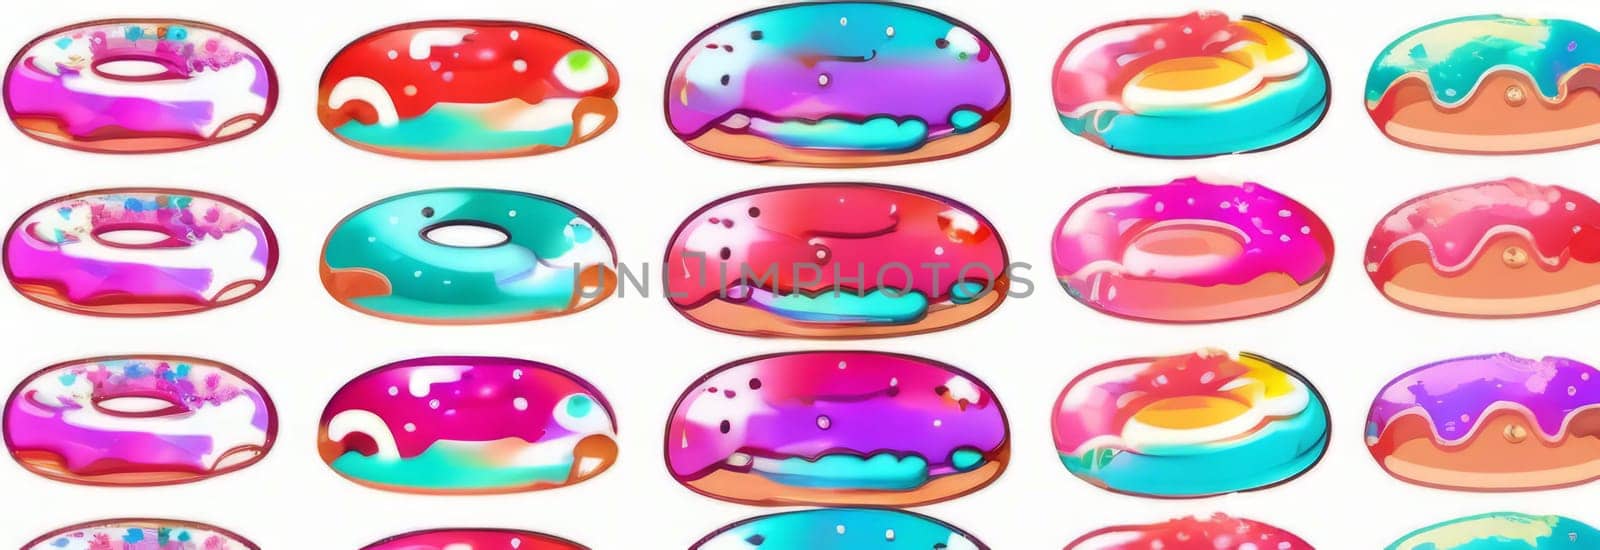 Variety of vibrant glazed donuts displayed on soft pink background, enticing with their colorful toppings, delicious allure. For cafe, pastry shop website, dessert advertisements, restaurant menu